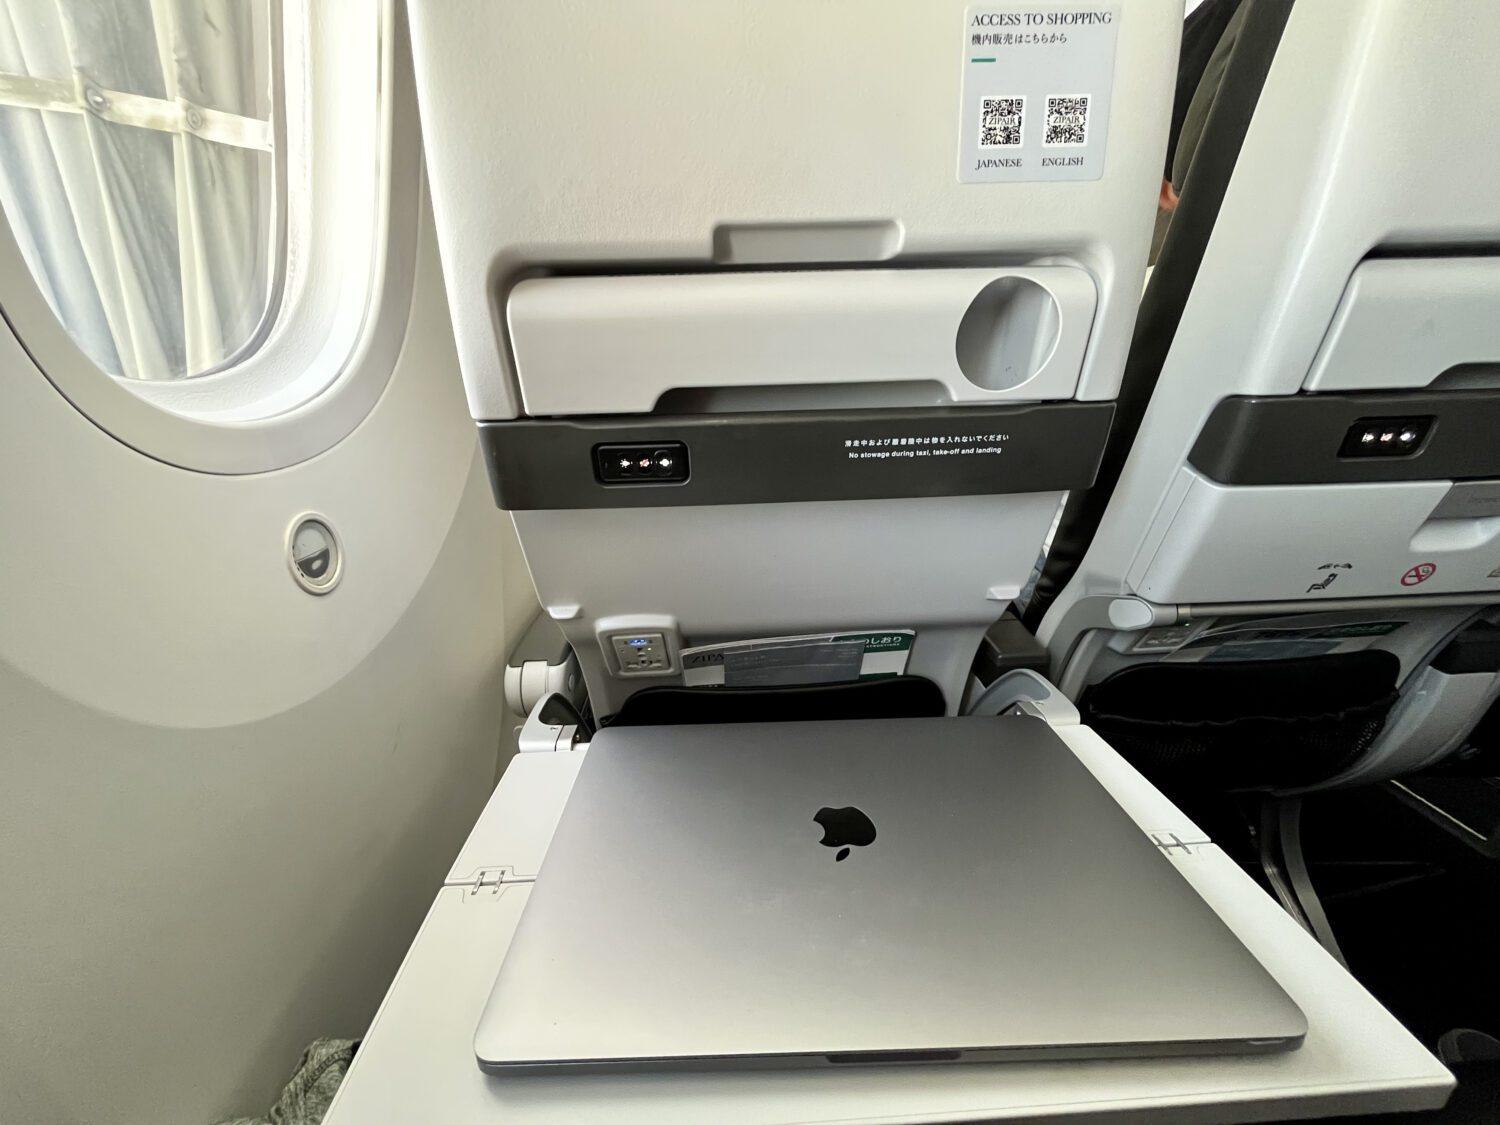 Zipair economy tray table with laptop